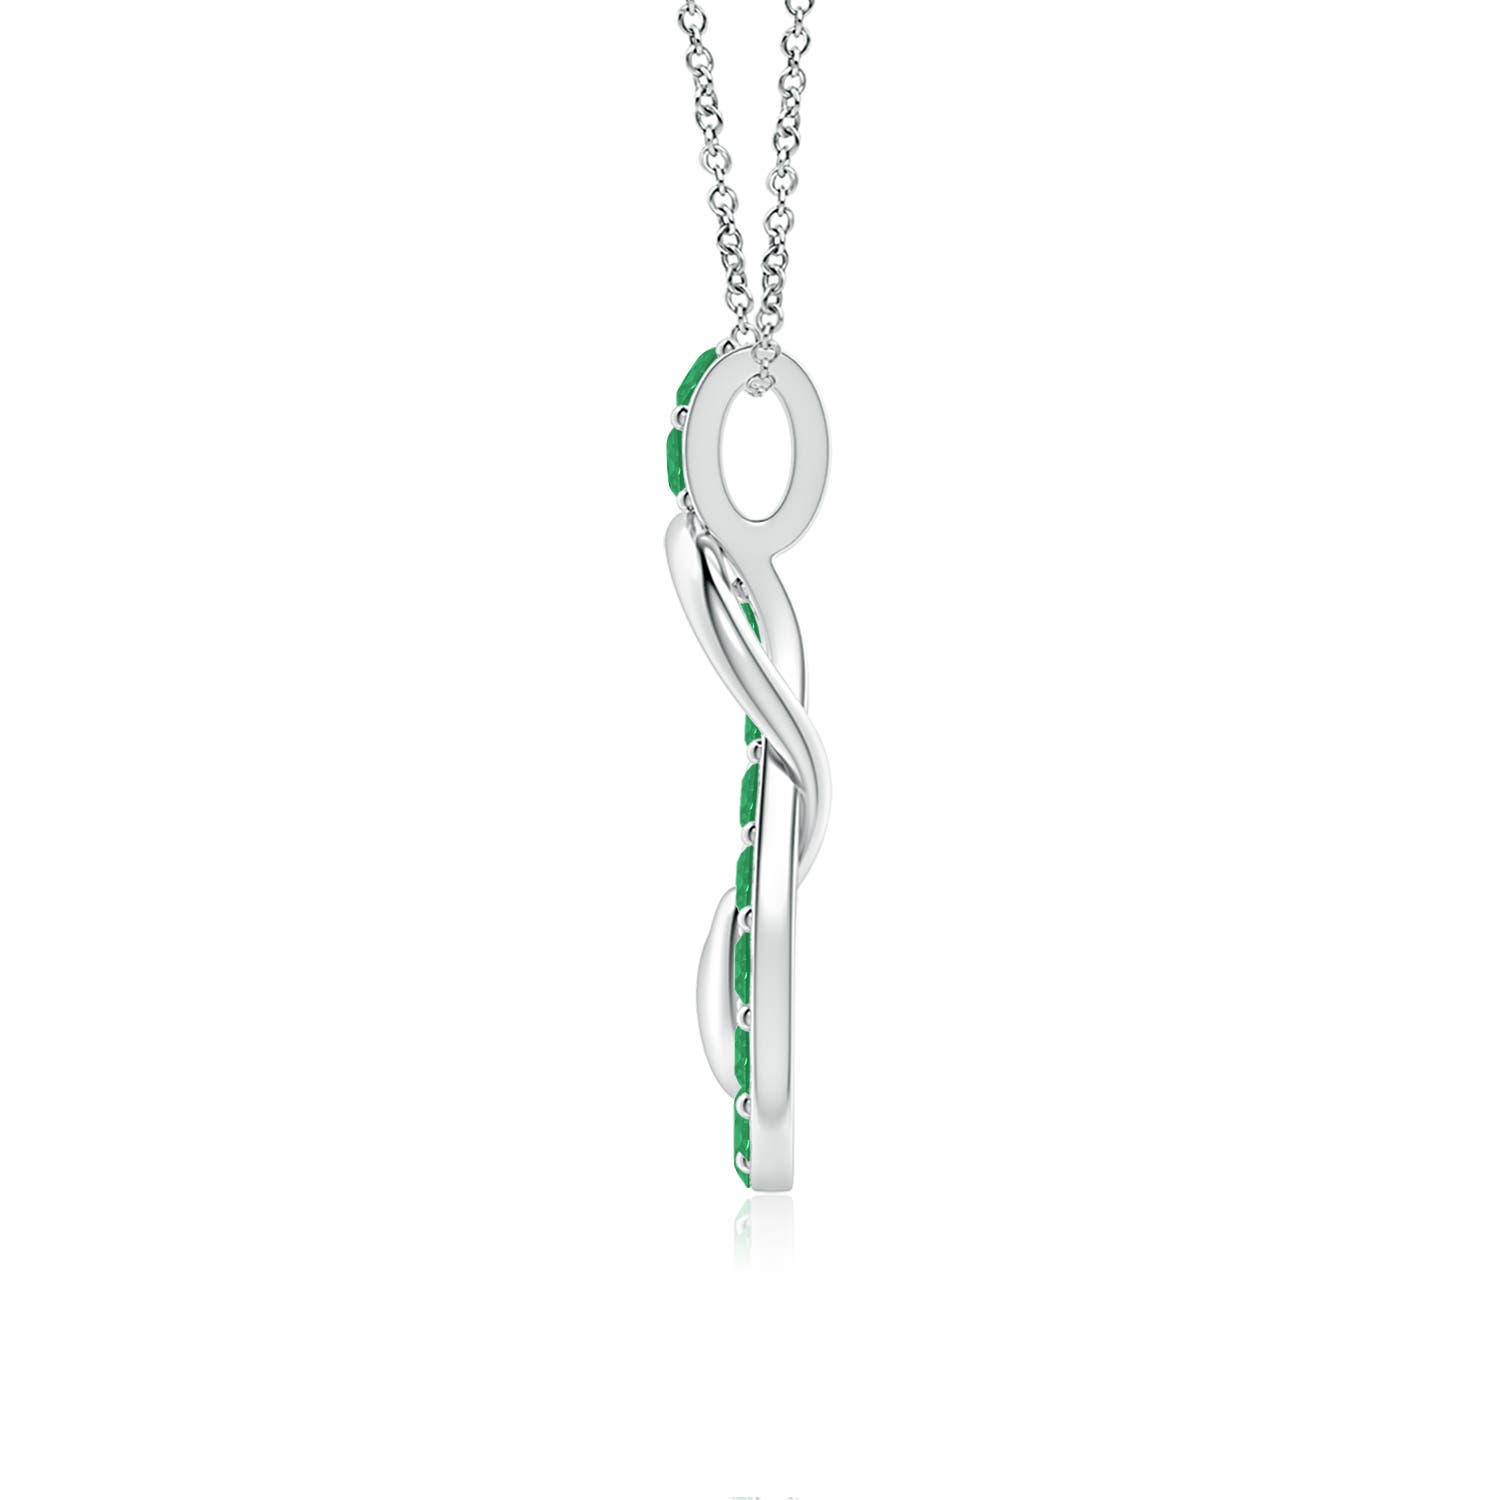 A - Emerald / 1.2 CT / 18 KT White Gold